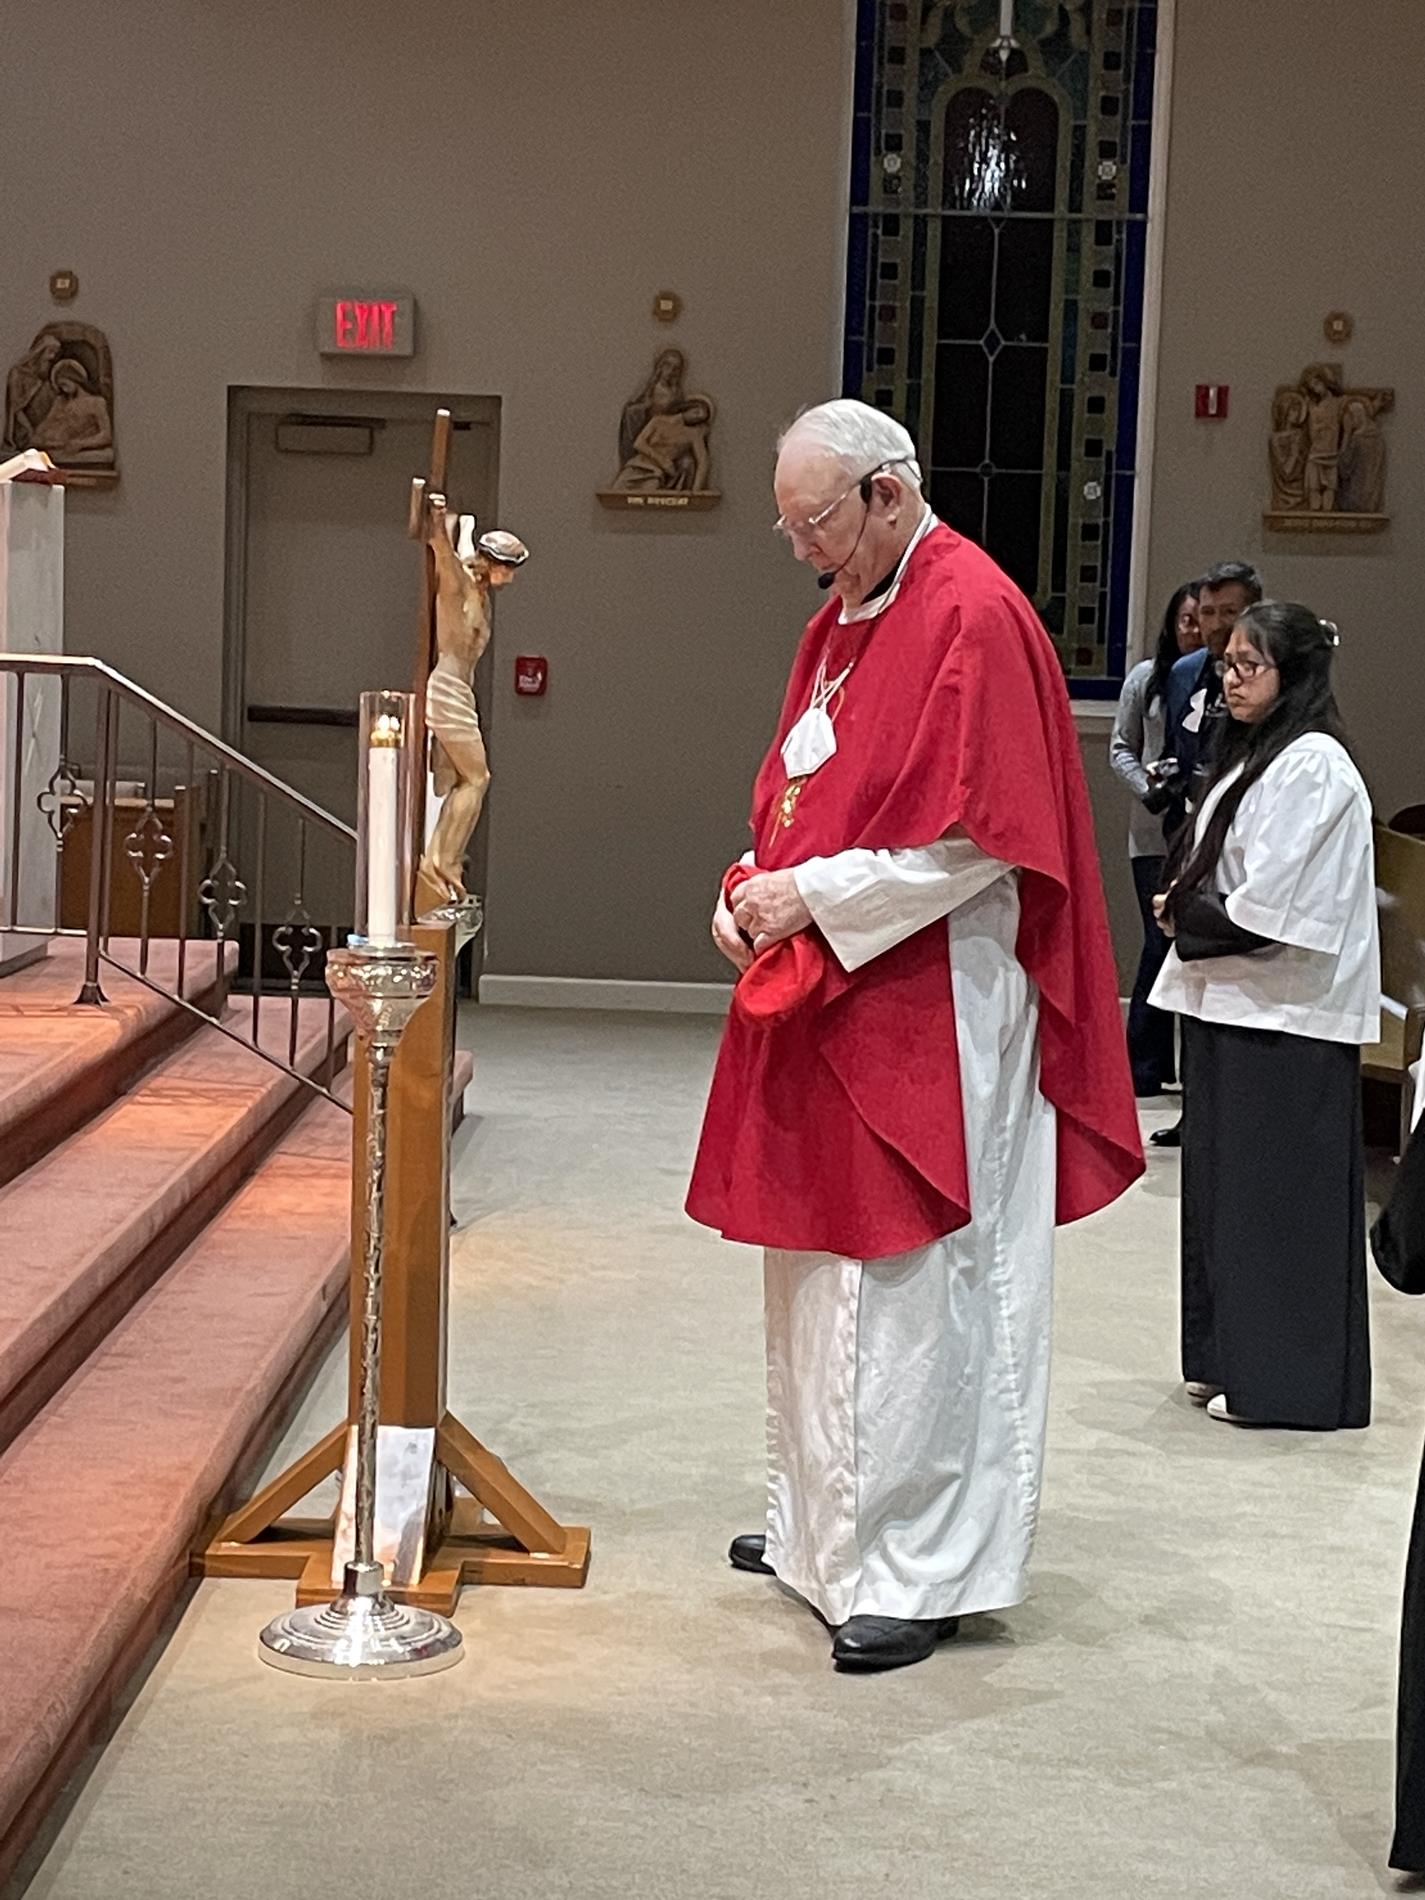 Father Wayne places the crucifix for adoration